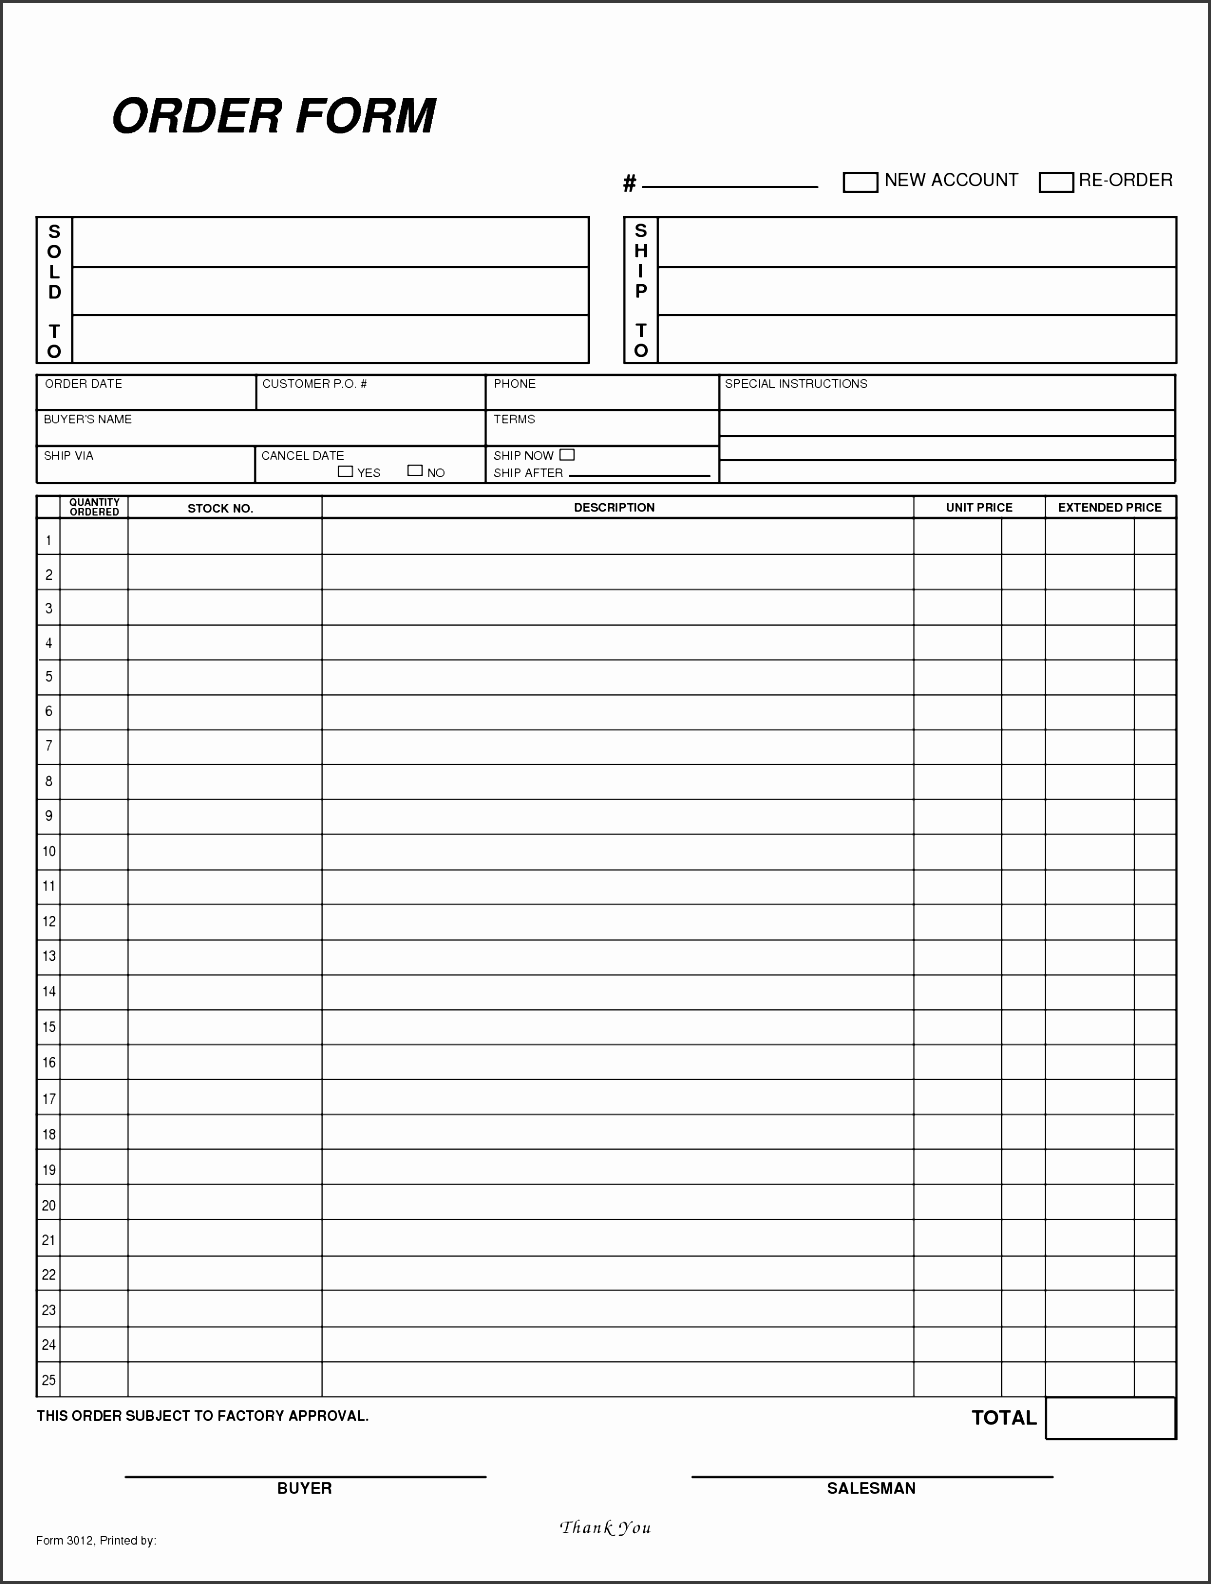 free blank order form template free blank order form urban essence aroma pinterest order form template and free